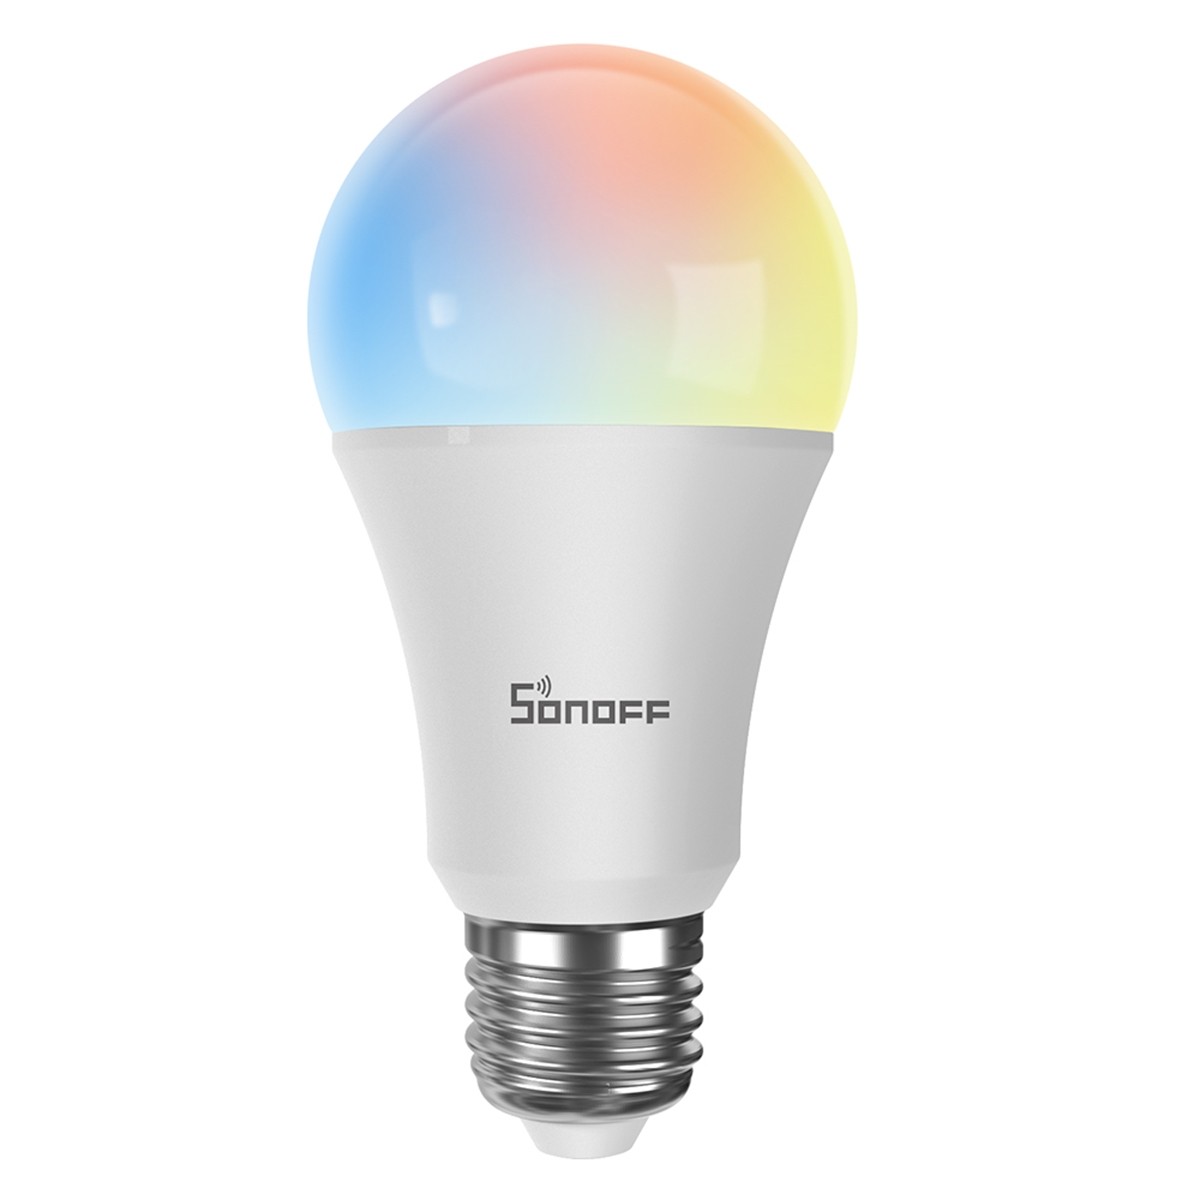 LED Λάμπα E27 Wi-Fi Smart A60 9W RGB+CCT 16M Colors & from 2700K to 6500K Dimmable SONOFF